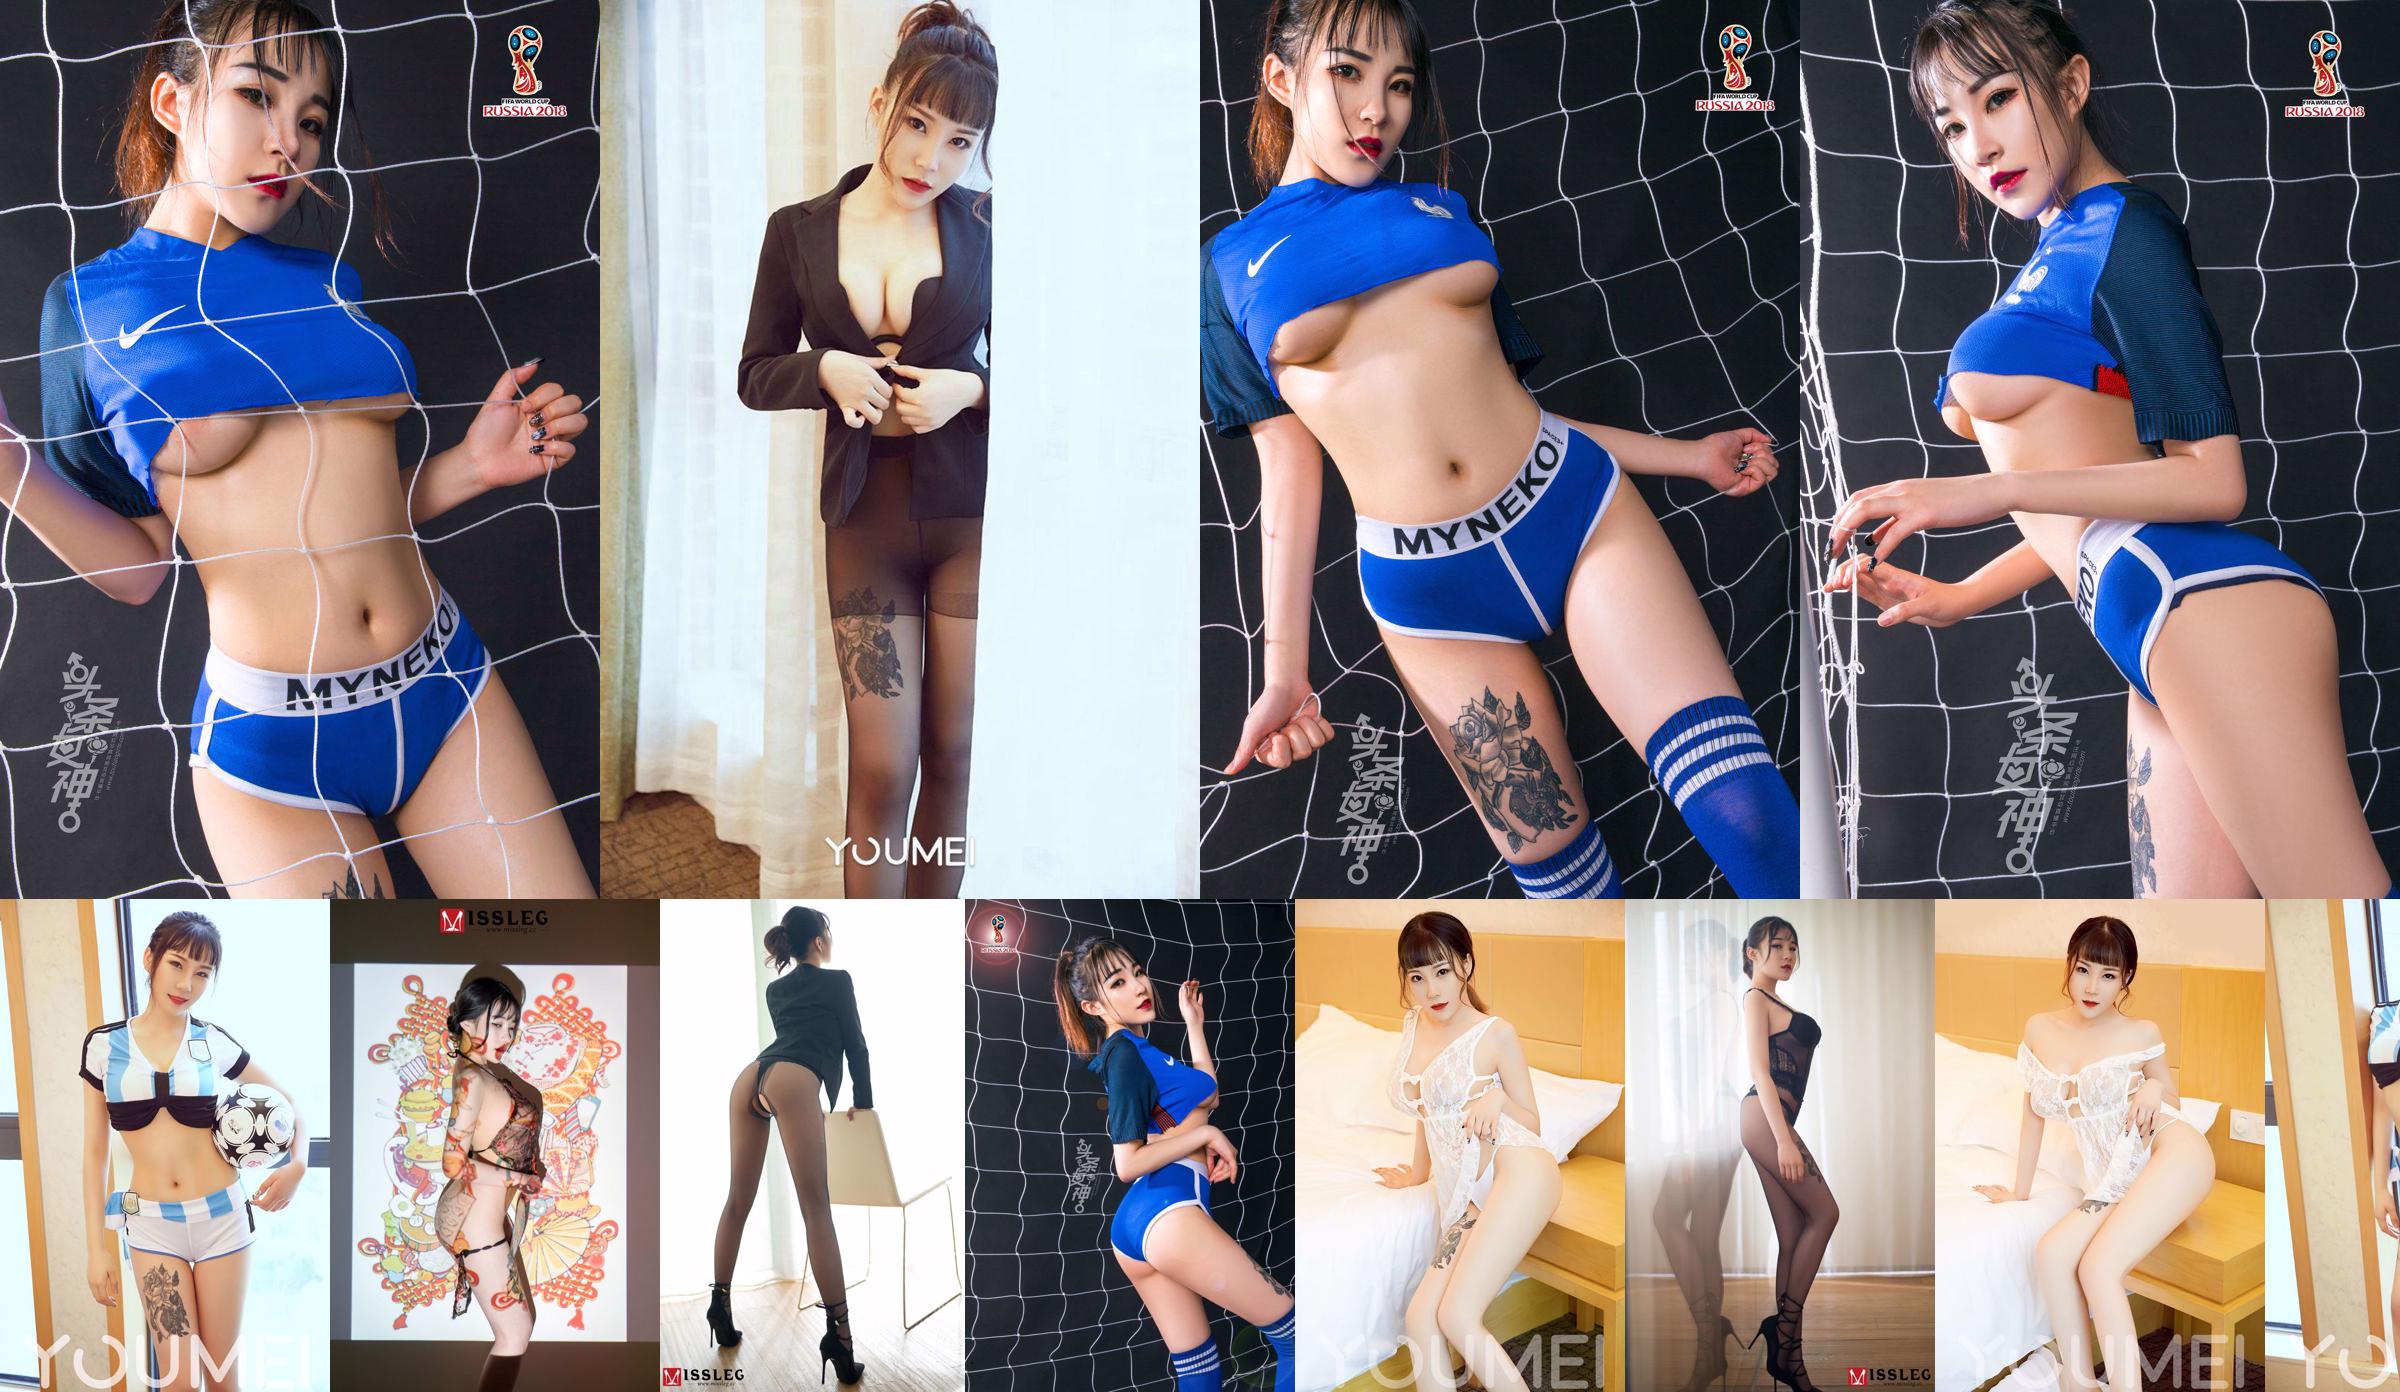 [IESS 奇思趣向] Model: Newcomer „Girls Who Love Laughter“ No.288a1a Seite 41